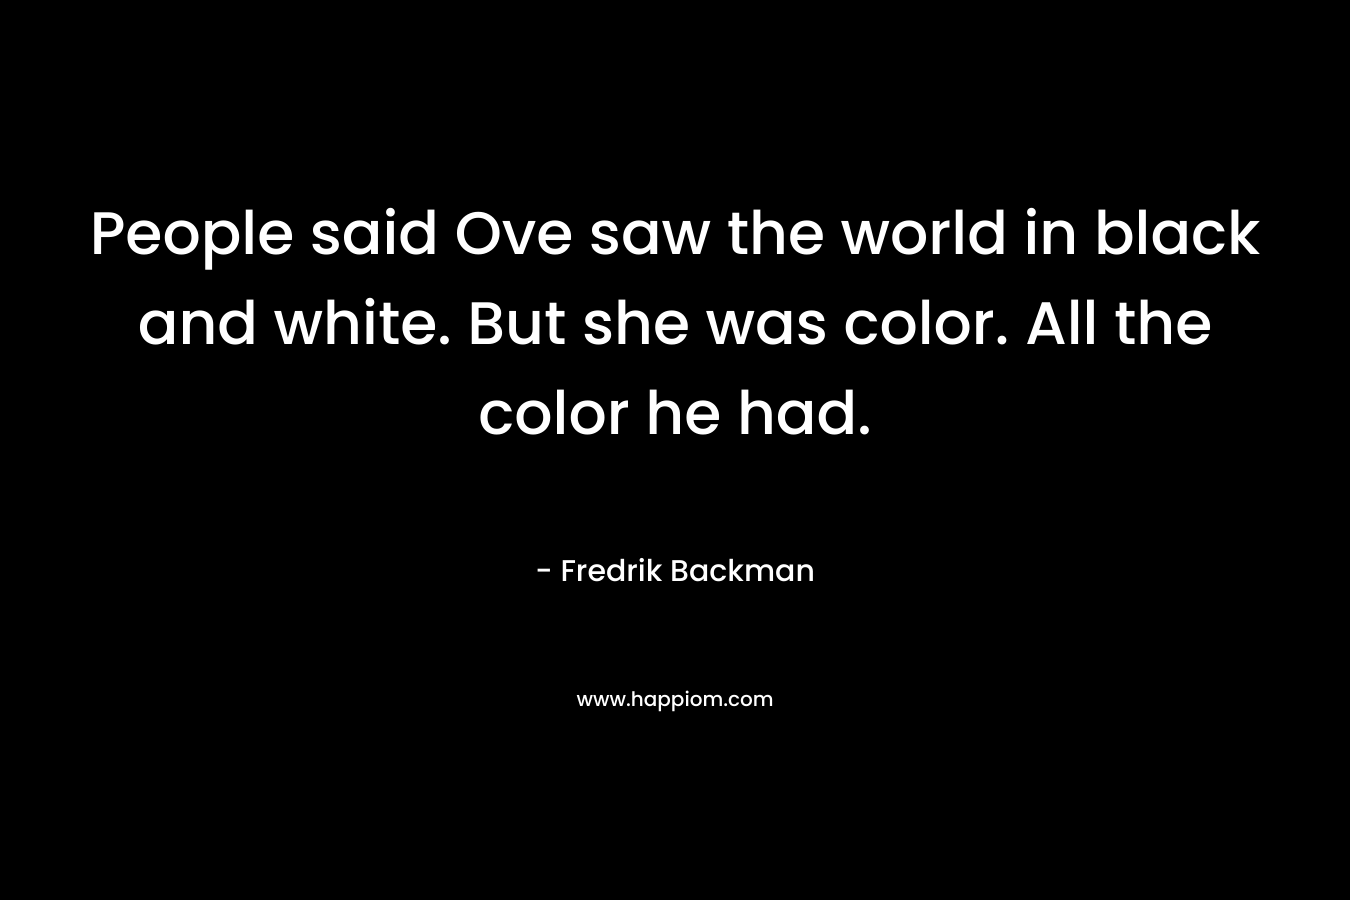 People said Ove saw the world in black and white. But she was color. All the color he had.